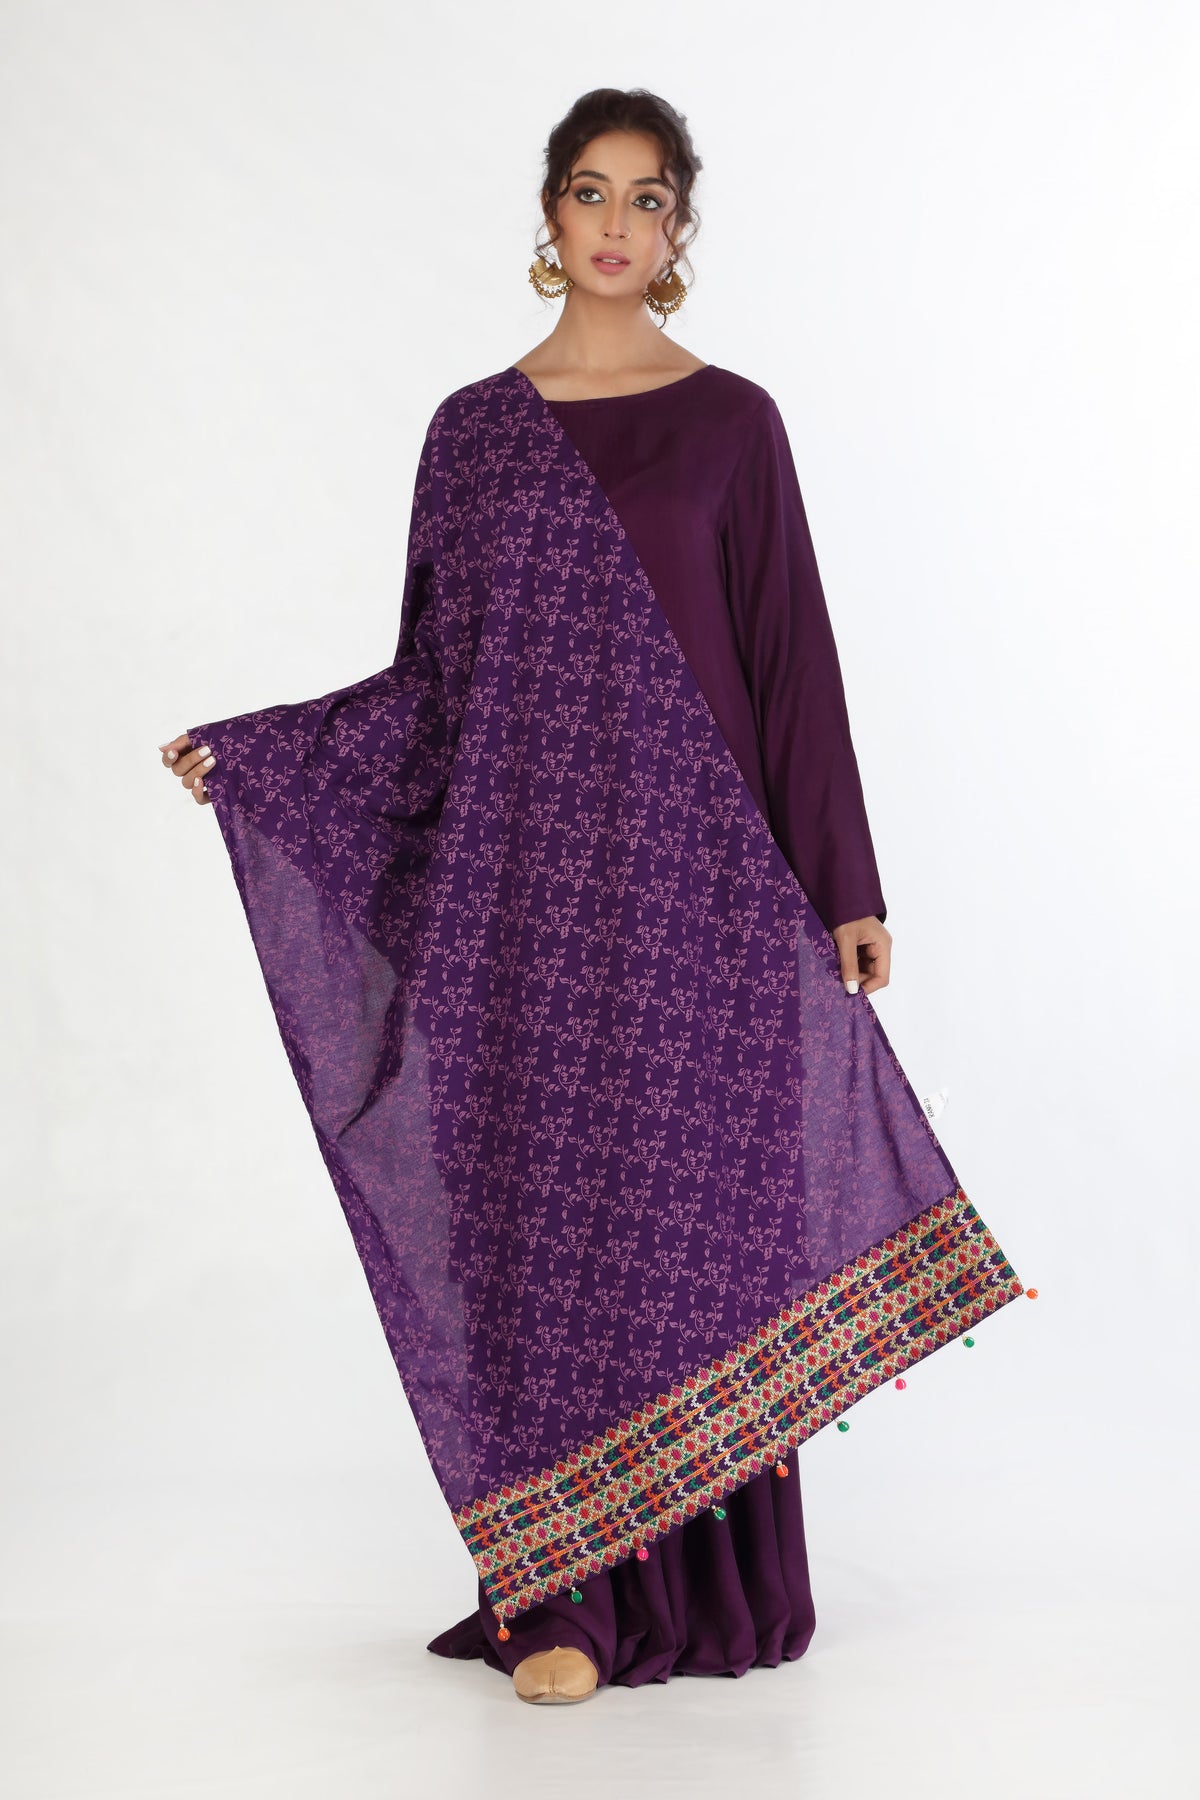 Running Print in Purple coloured Printed Cambric fabric